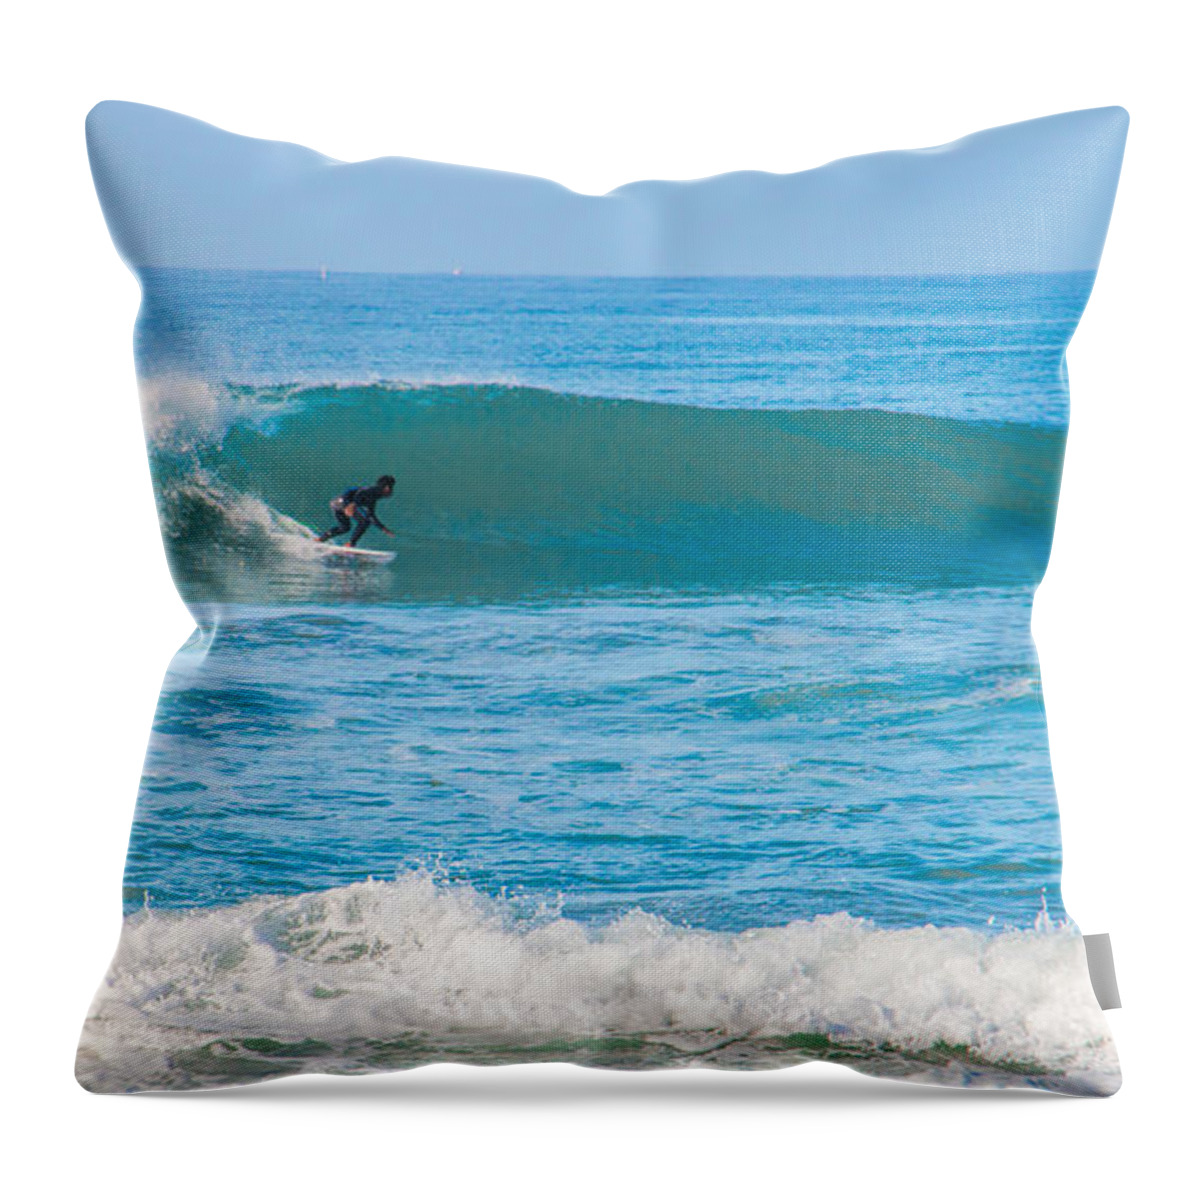 Surfing Throw Pillow featuring the photograph Surfing by Dorothy Cunningham